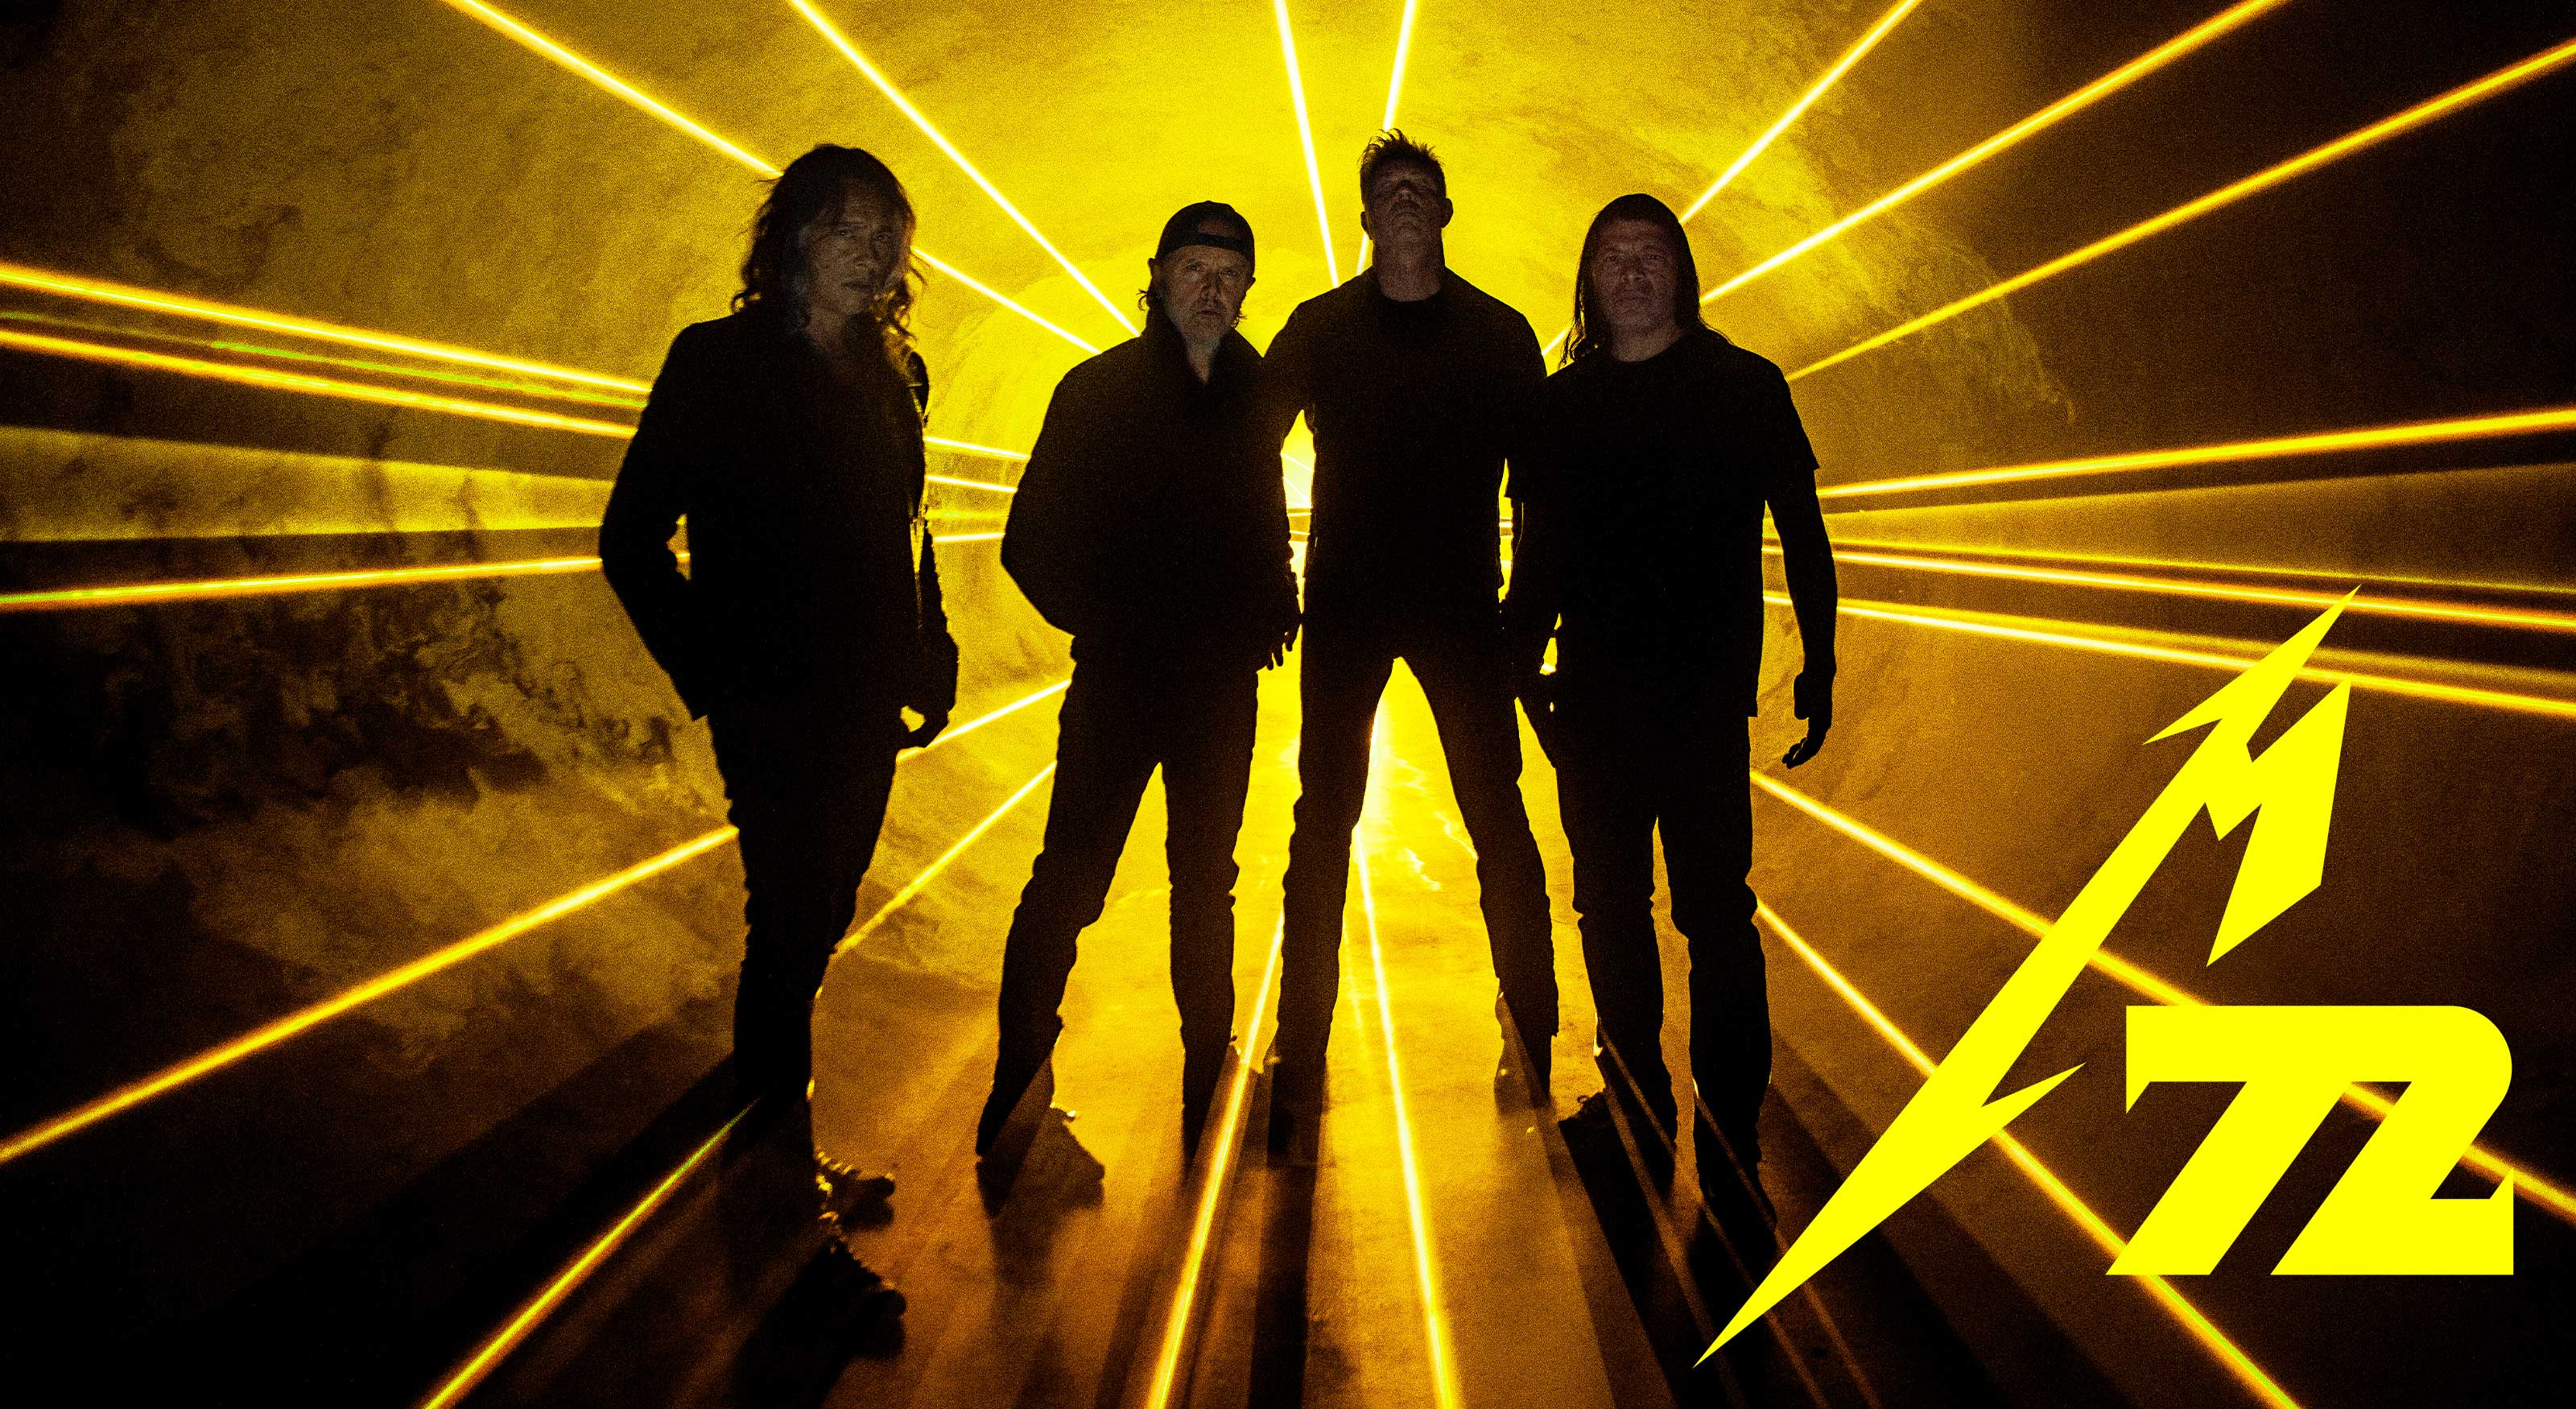 Silhouette of band members in a yellow, laser light tunnel. The bottom-right corner reads "M72".